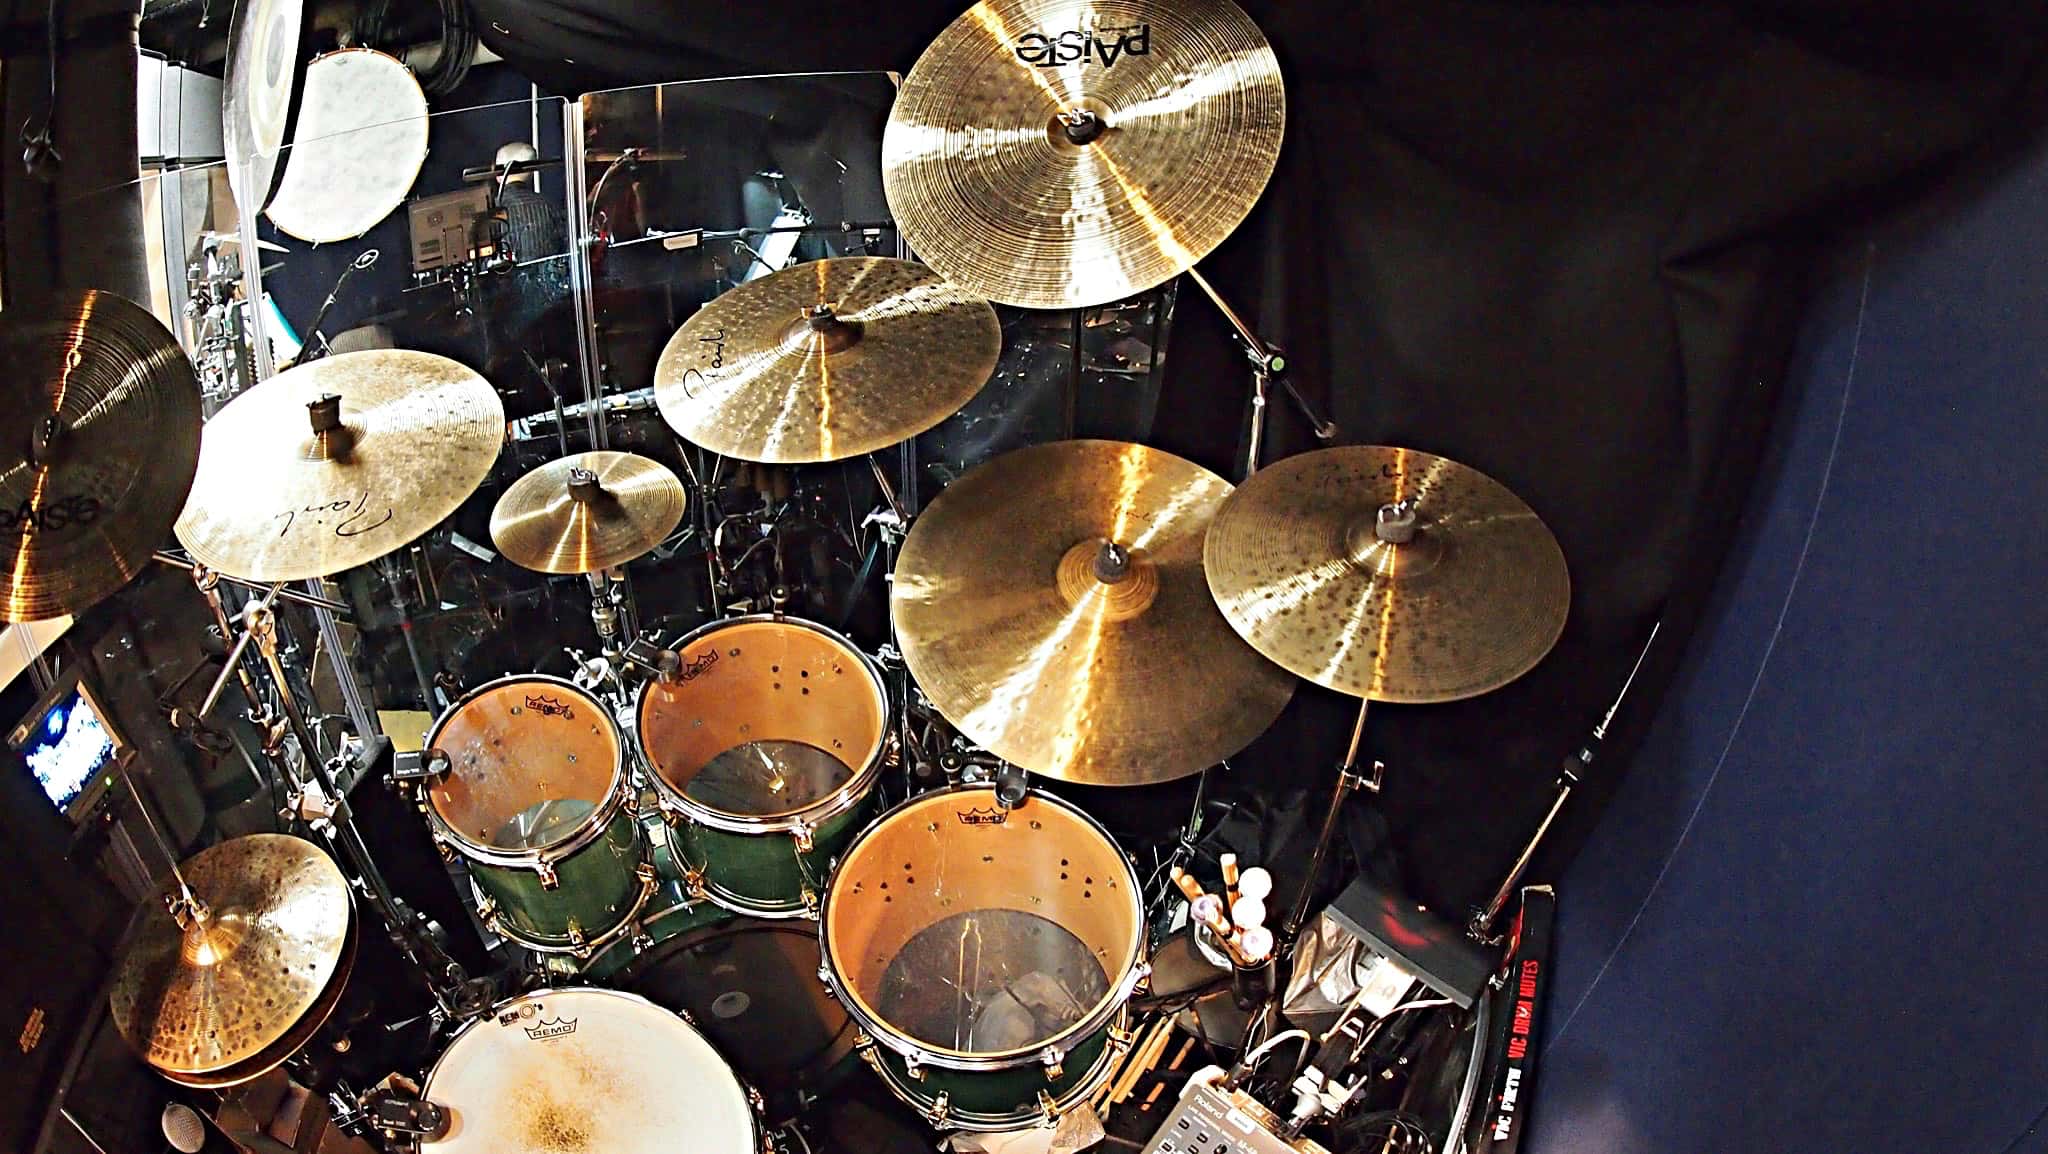 Bill Lanham’s drum set setup for the Broadway revival of Cats at the Neil Simon Theatre.